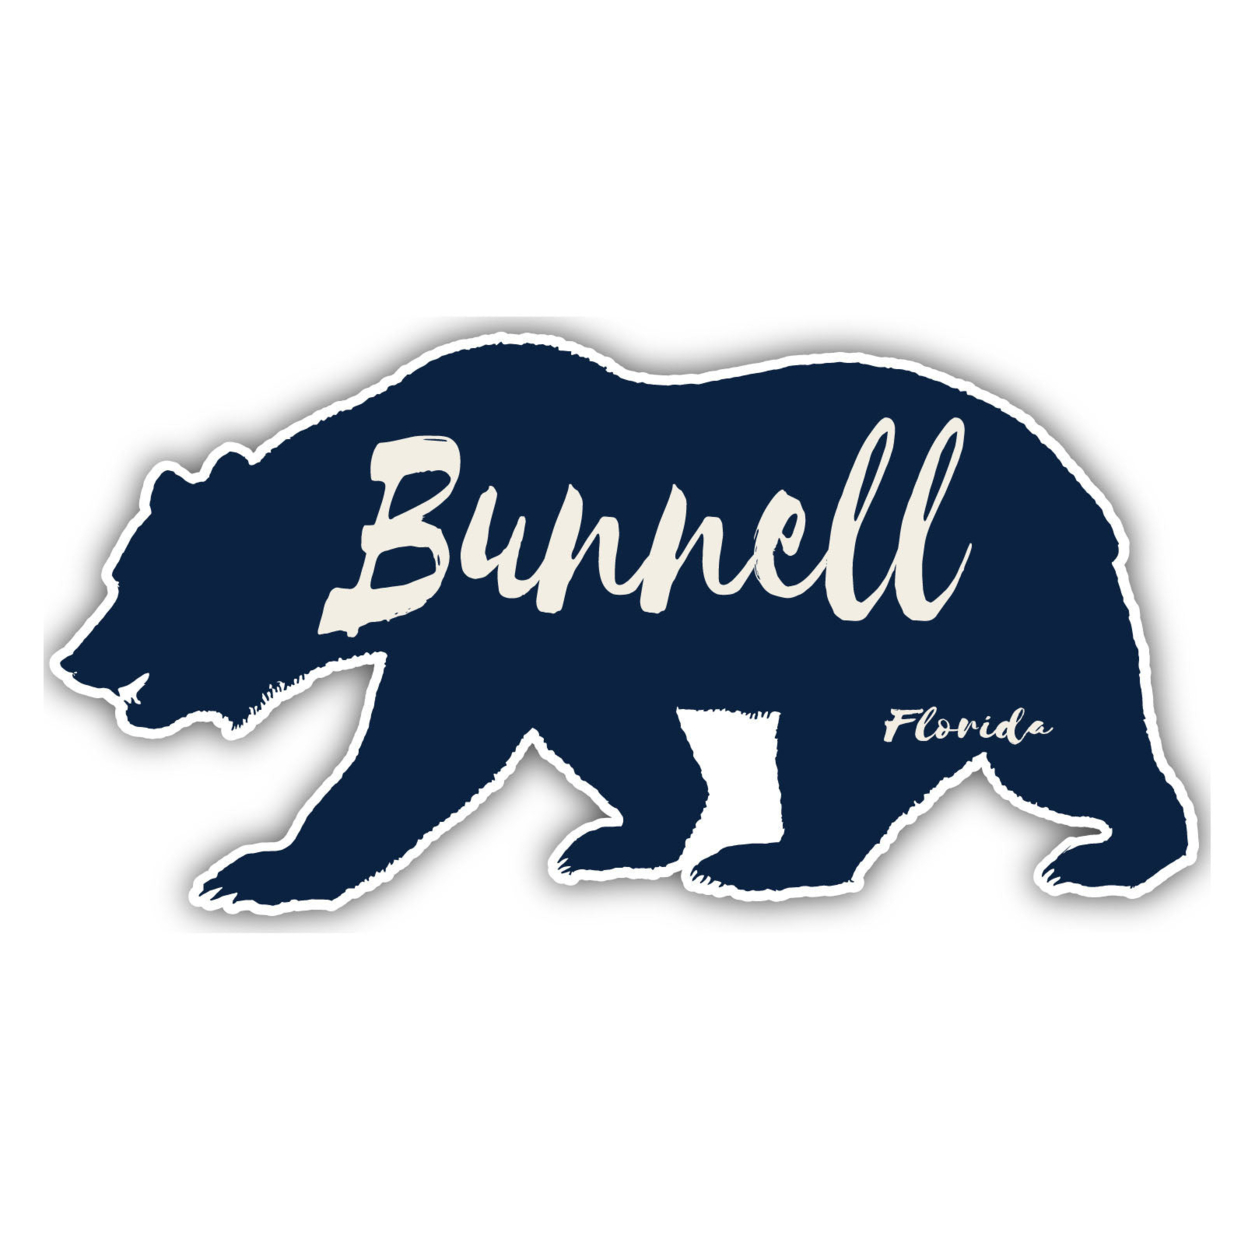 Bunnell Florida Souvenir Decorative Stickers (Choose Theme And Size) - 4-Pack, 12-Inch, Bear